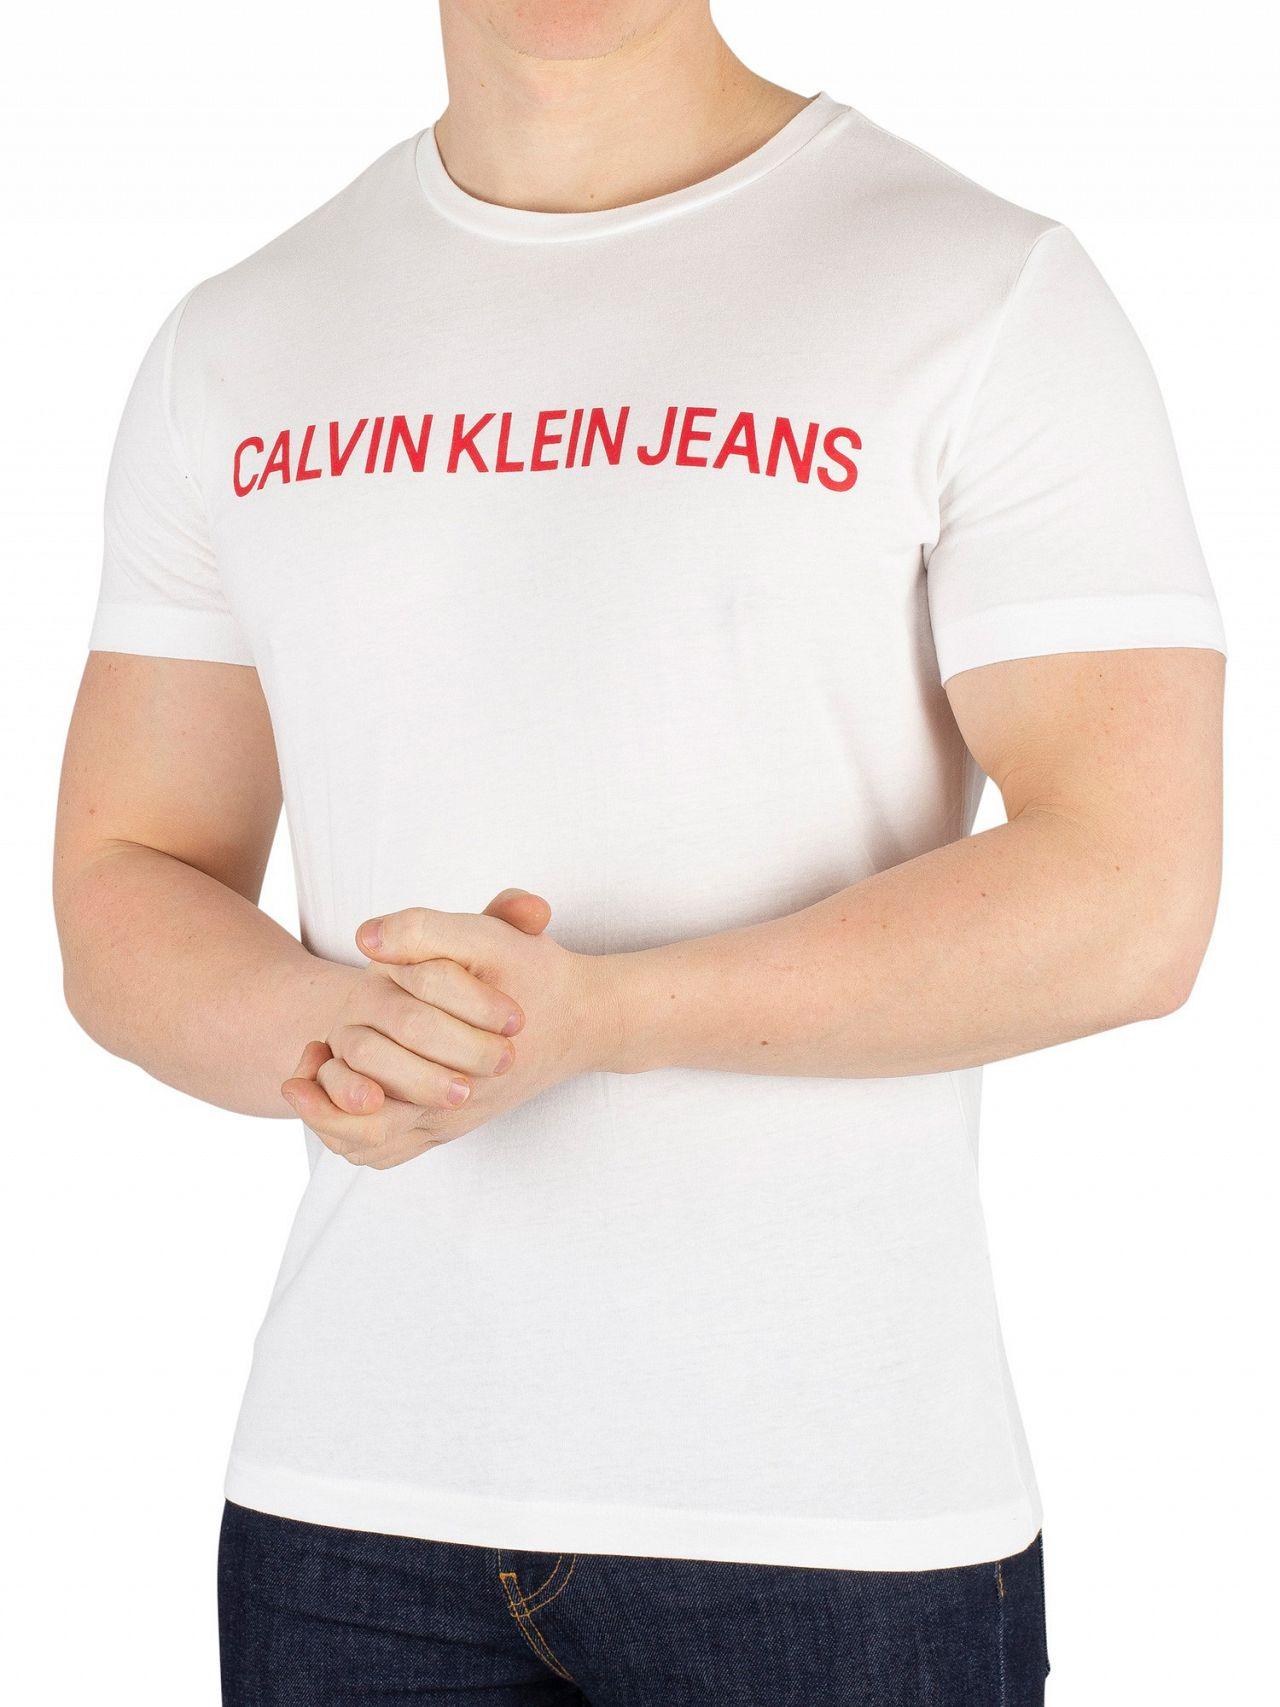 Calvin Klein White And Red T Shirt Hotsell, 54% OFF | www.gruposincom.es